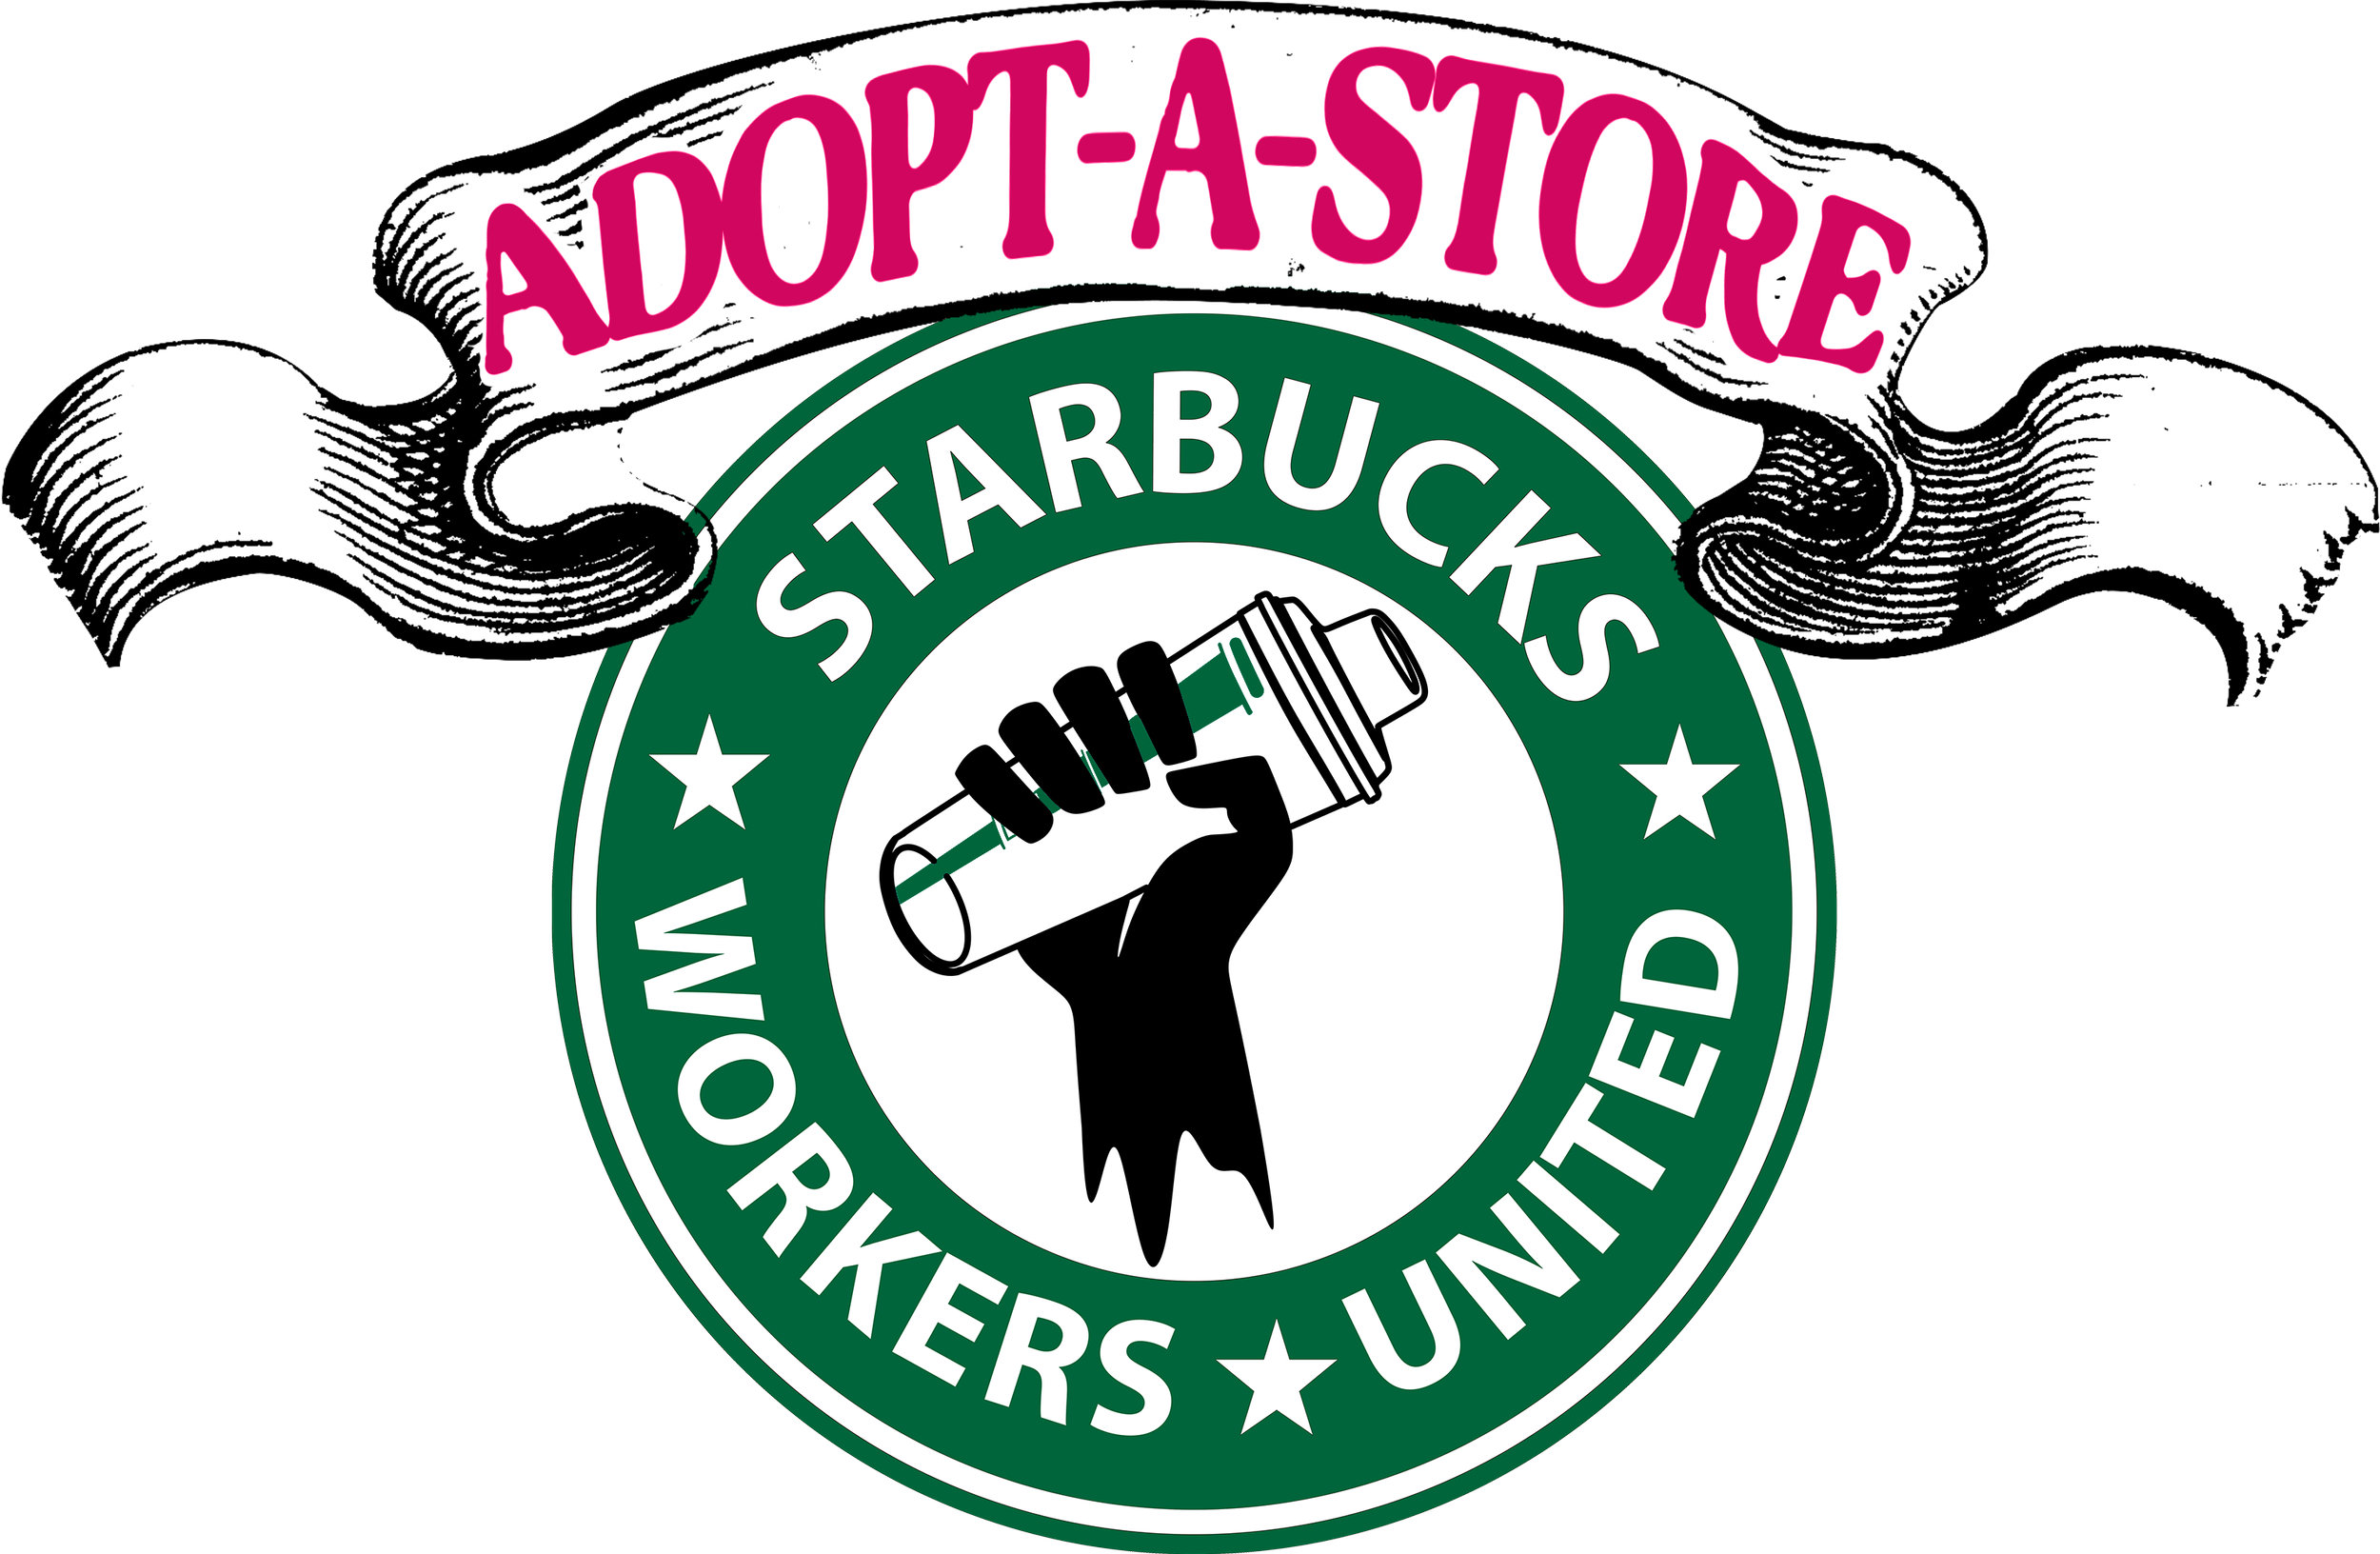 August 7 - Support Starbucks Workers! | Women's March